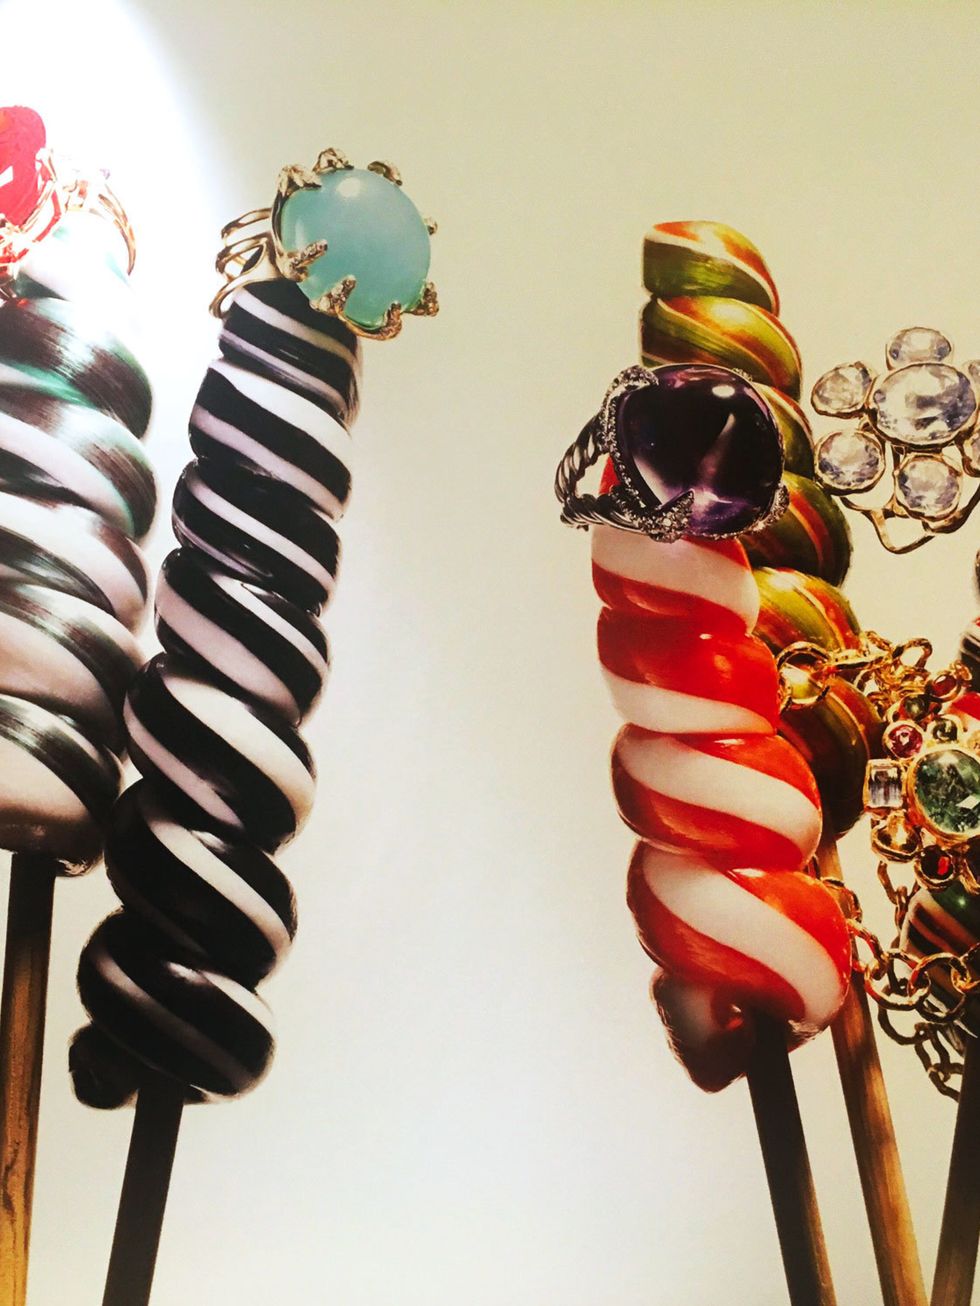 Candy, Confectionery, Cuisine, Dessert, Sweetness, Hard candy, Earrings, Body jewelry, Lollipop, Stick candy, 